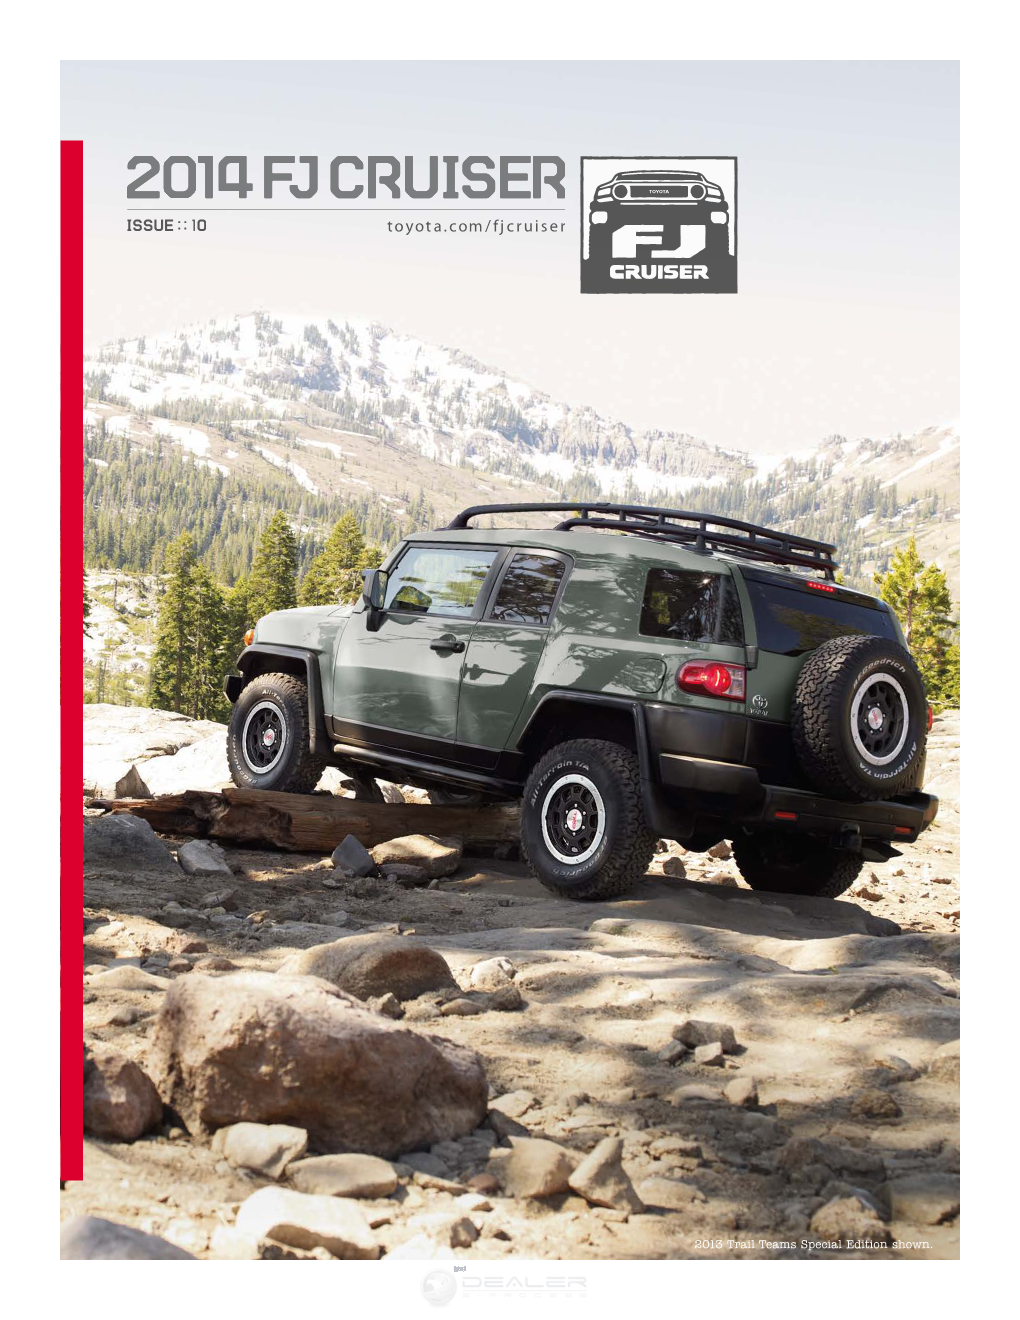 2014 FJ Cruiser Was Engineered with Precisely Those People in Mind